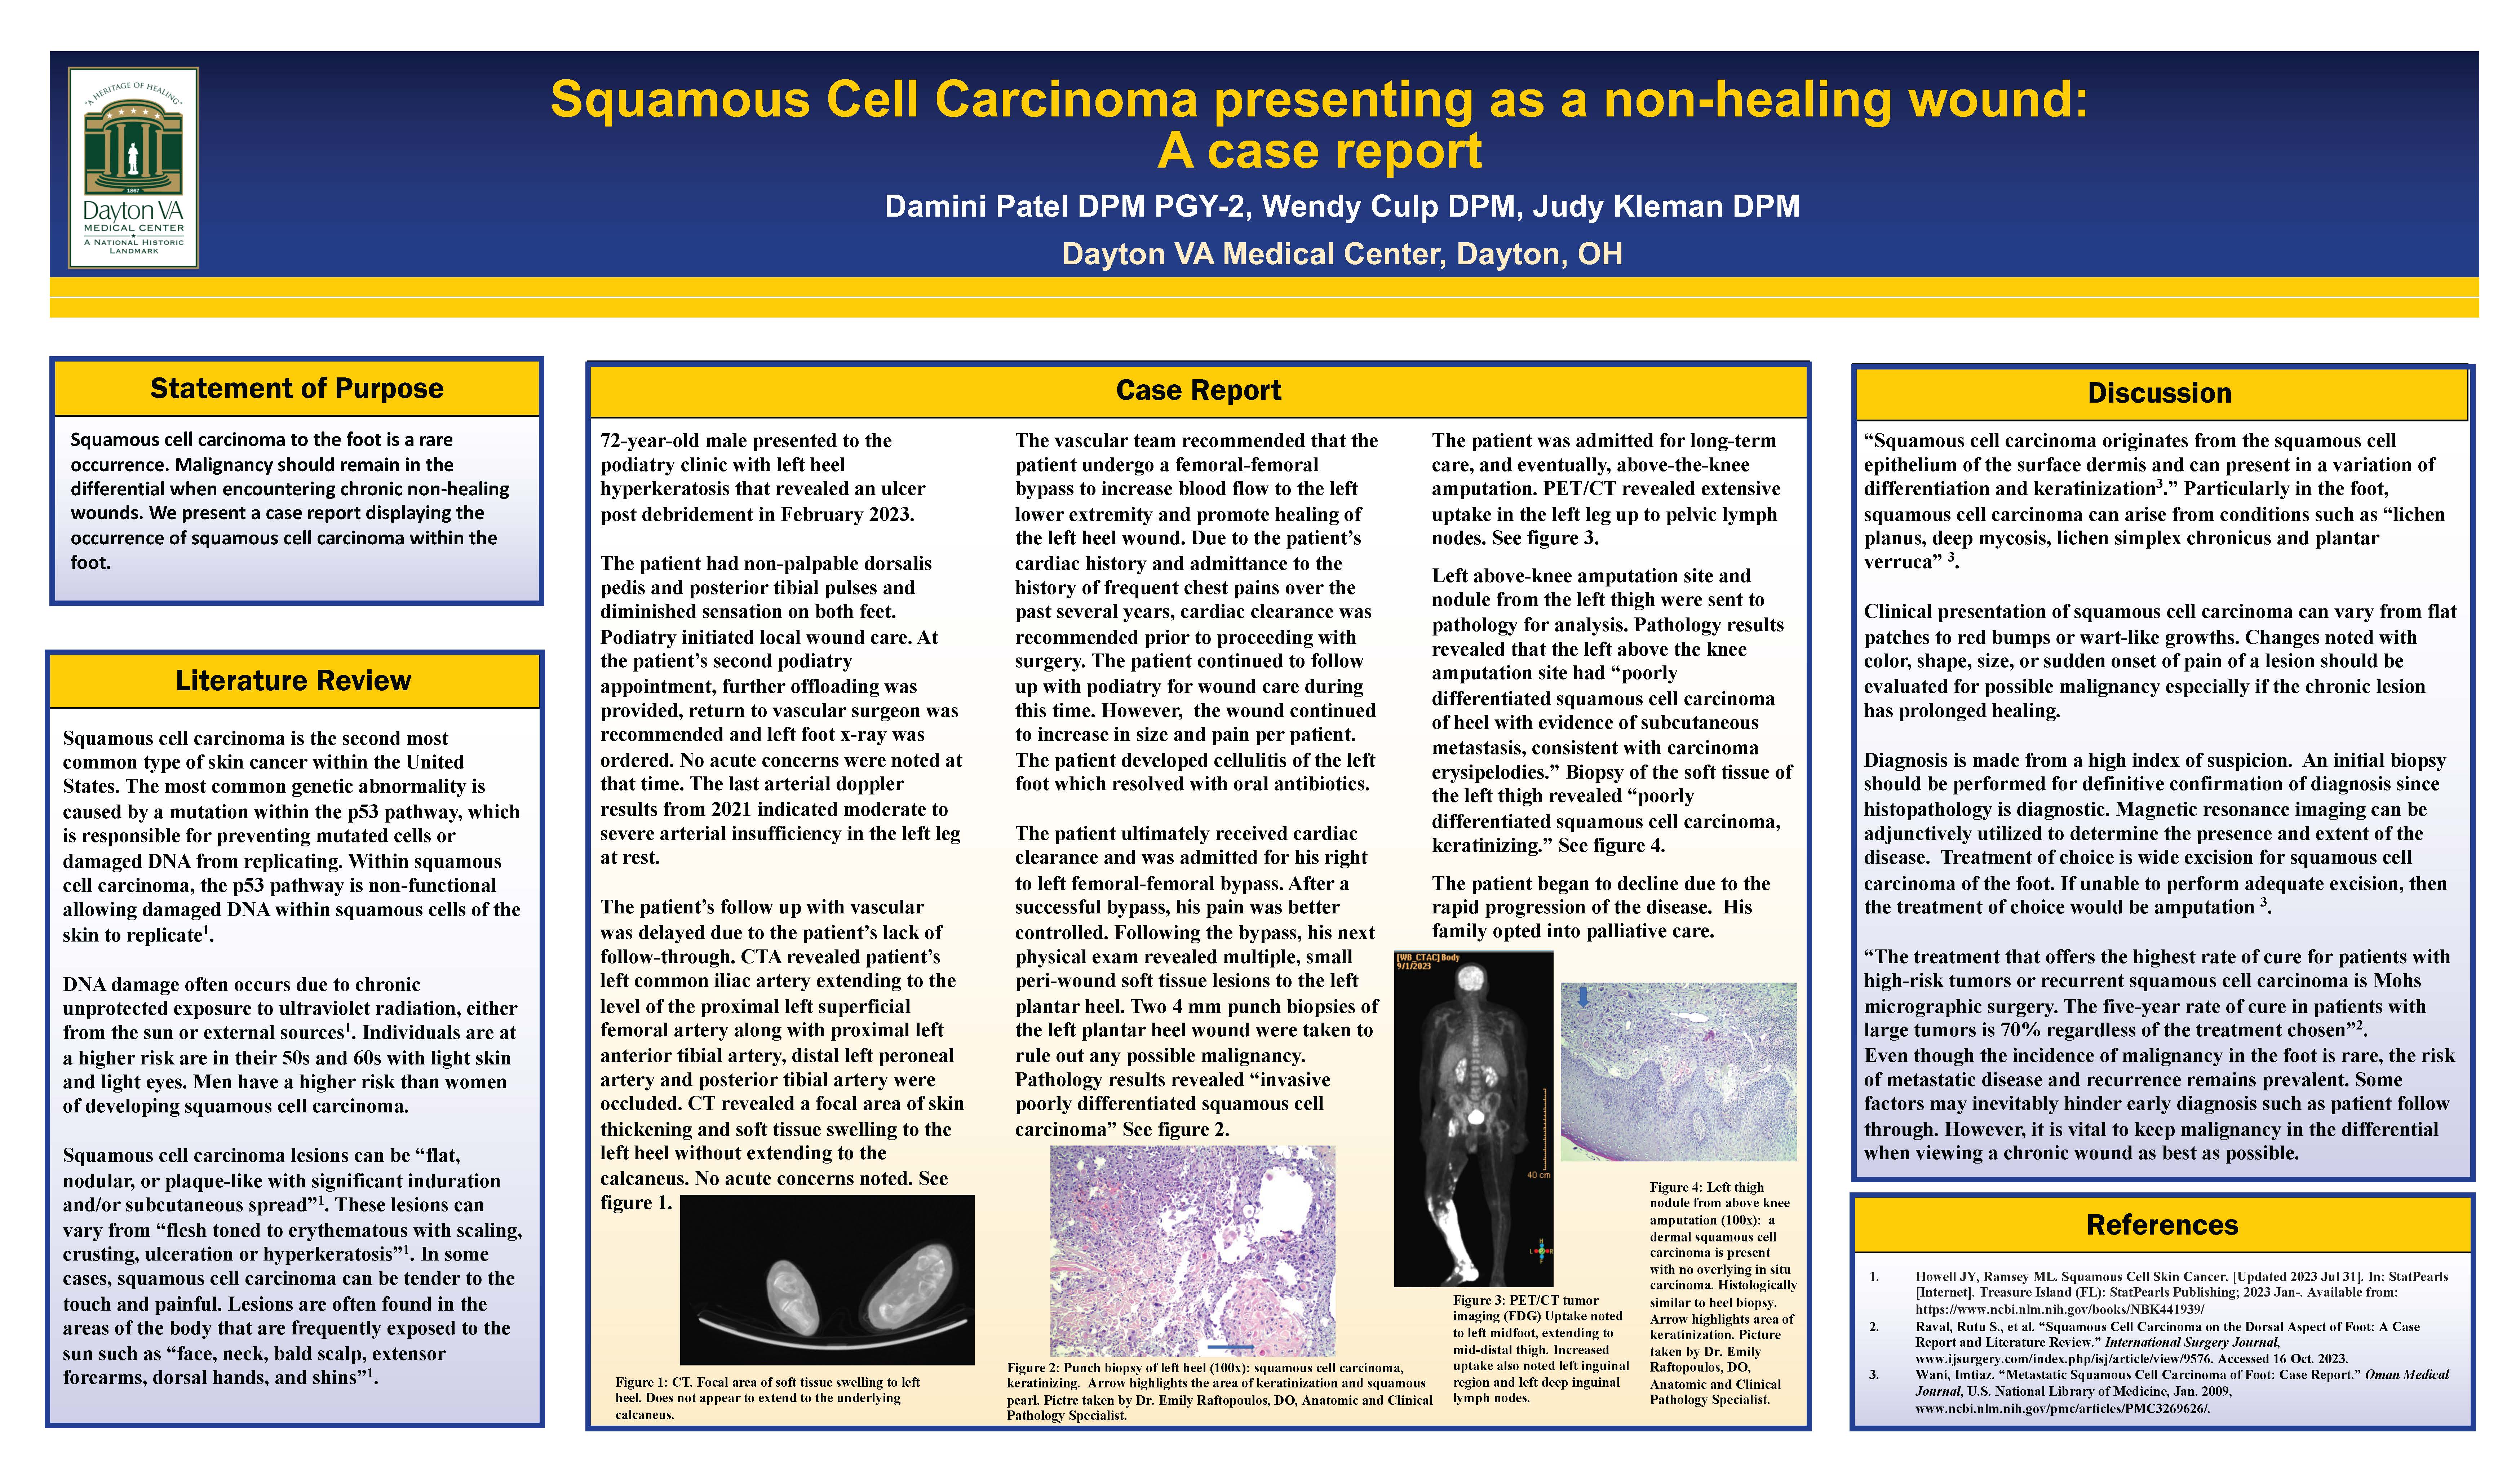 Squamous Cell Carcinoma Presenting as a Non-Healing Wound